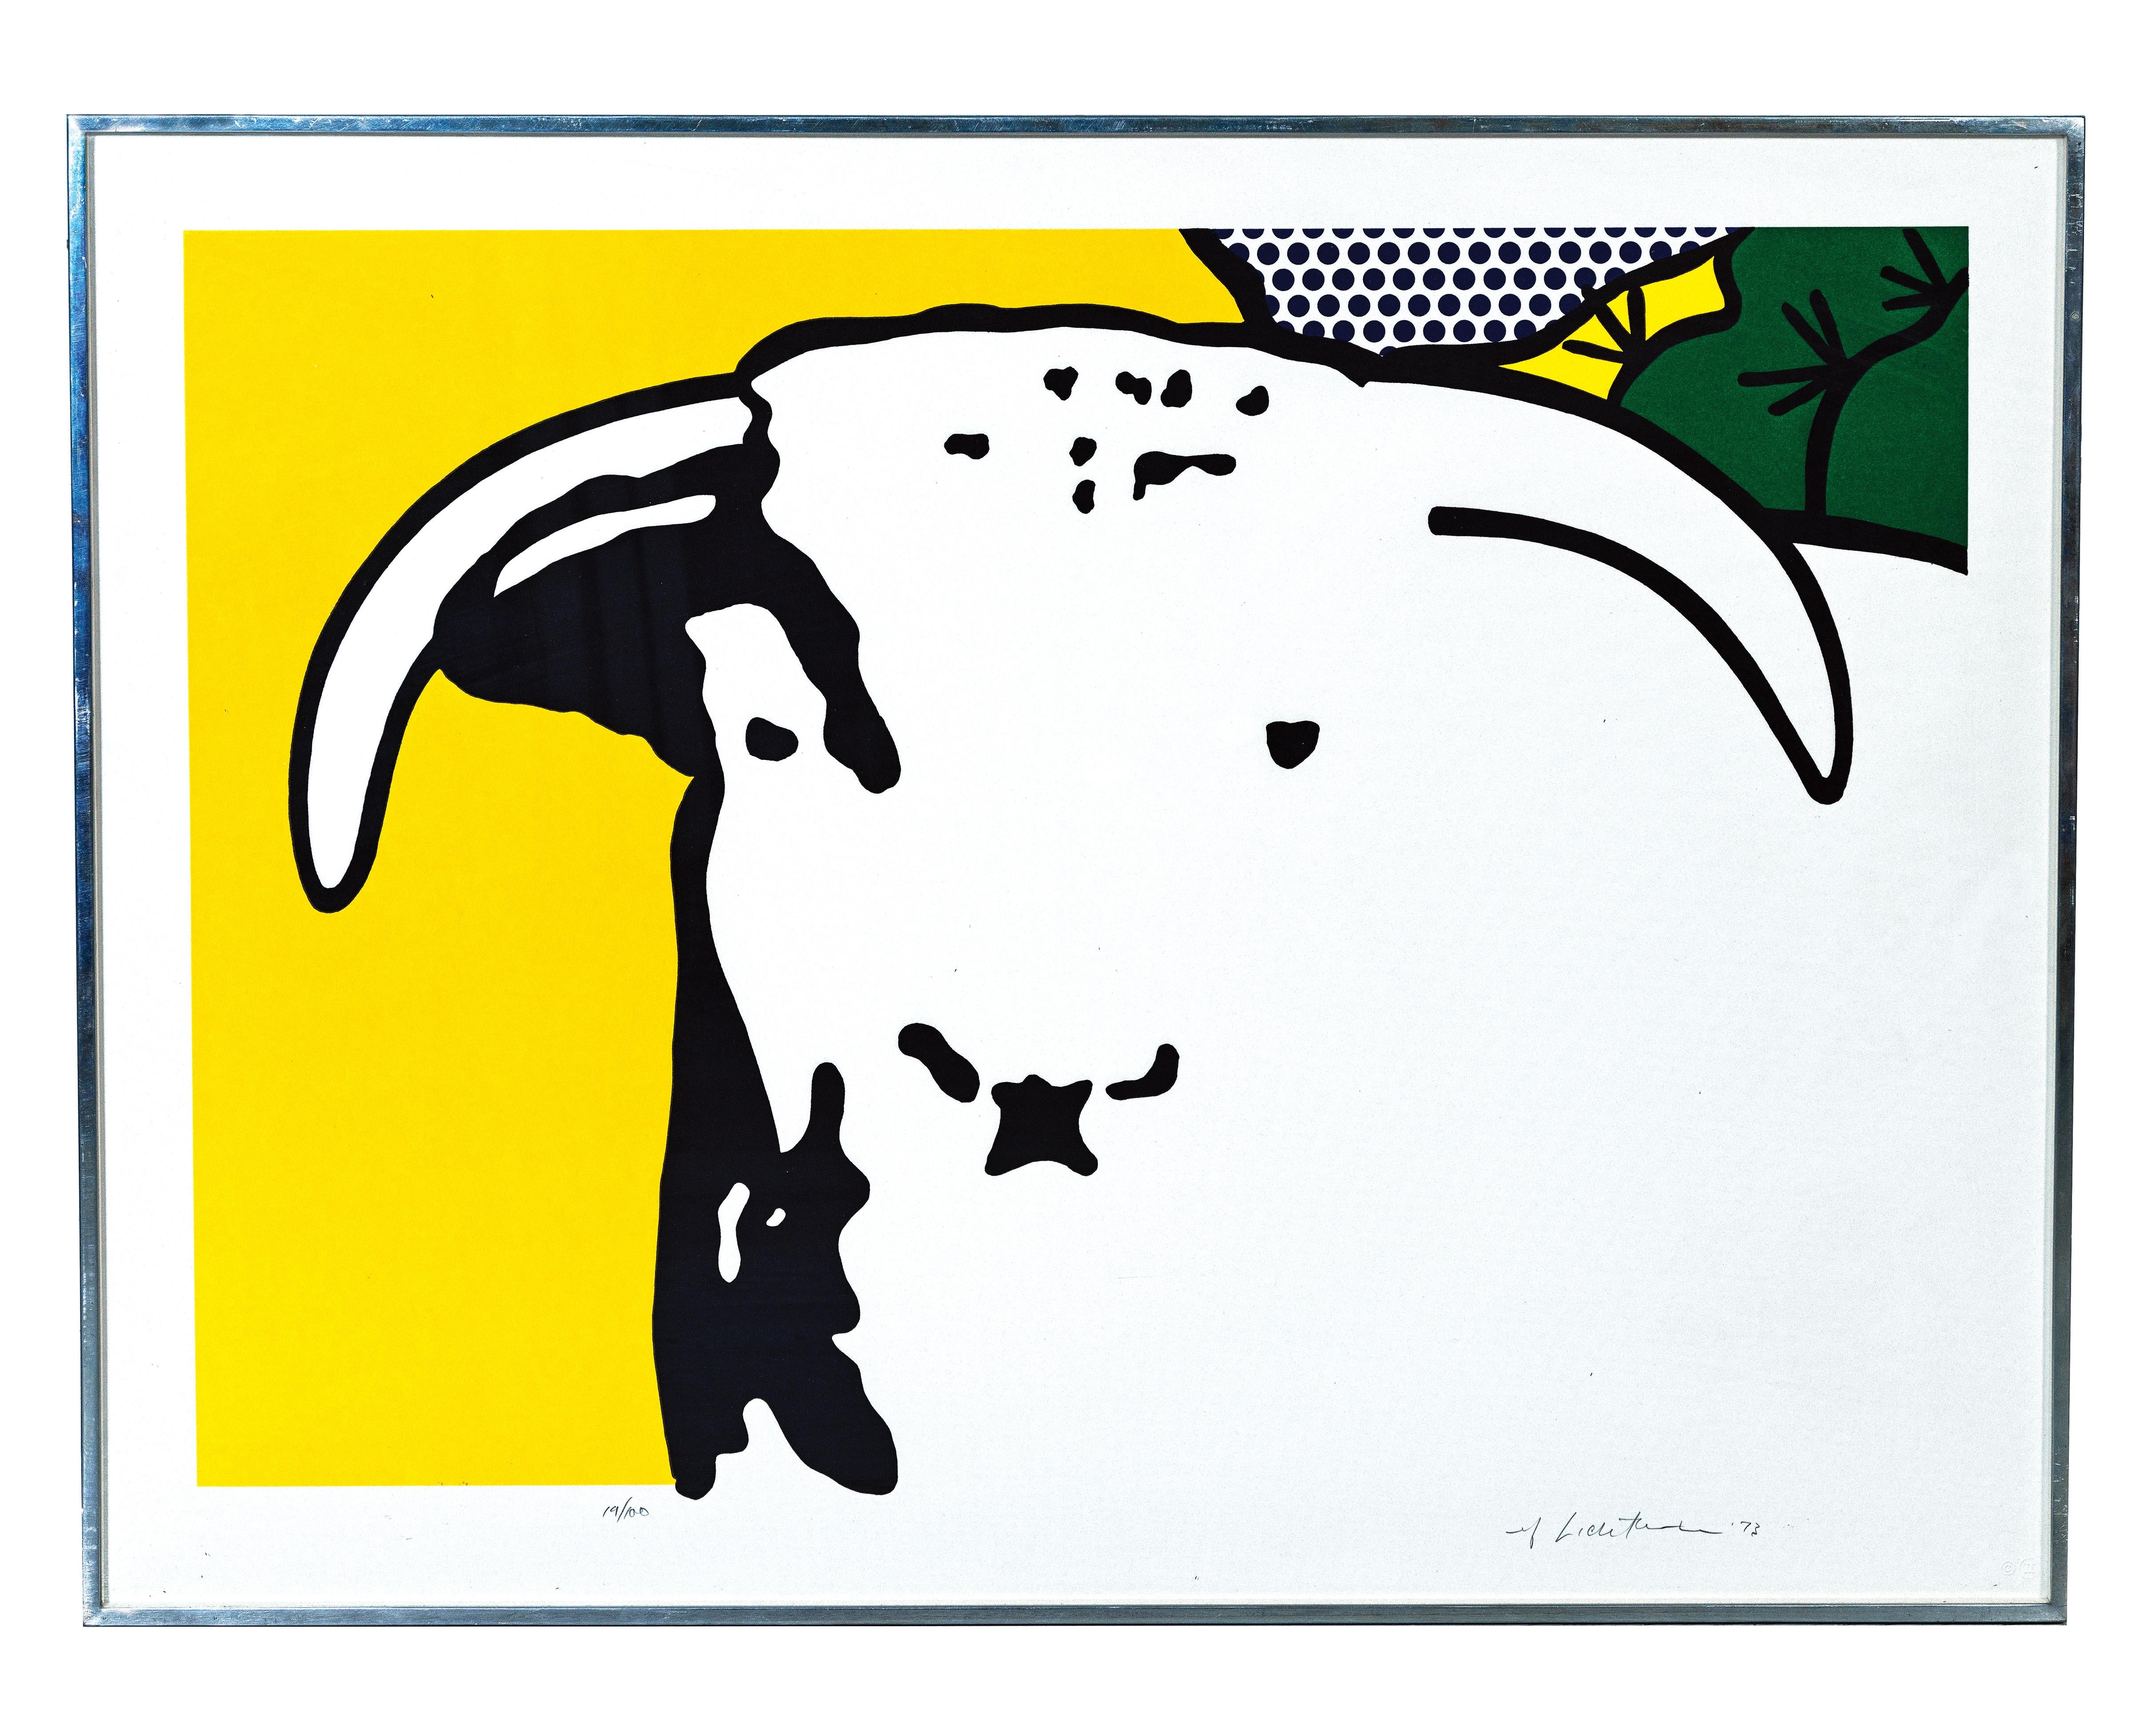 Bull Head I

Lithograph and line-cut on Arjomari paper, 1973.
Signed and numbered from an edition on 100 in  pencil by the artist.
Published by Gemini G.E.L. , Los Angeles.
Sheet: 63.4 x 83.8 cm.
Image: 54.1 x 74.9 cm

Bull Head II

Lithograph,